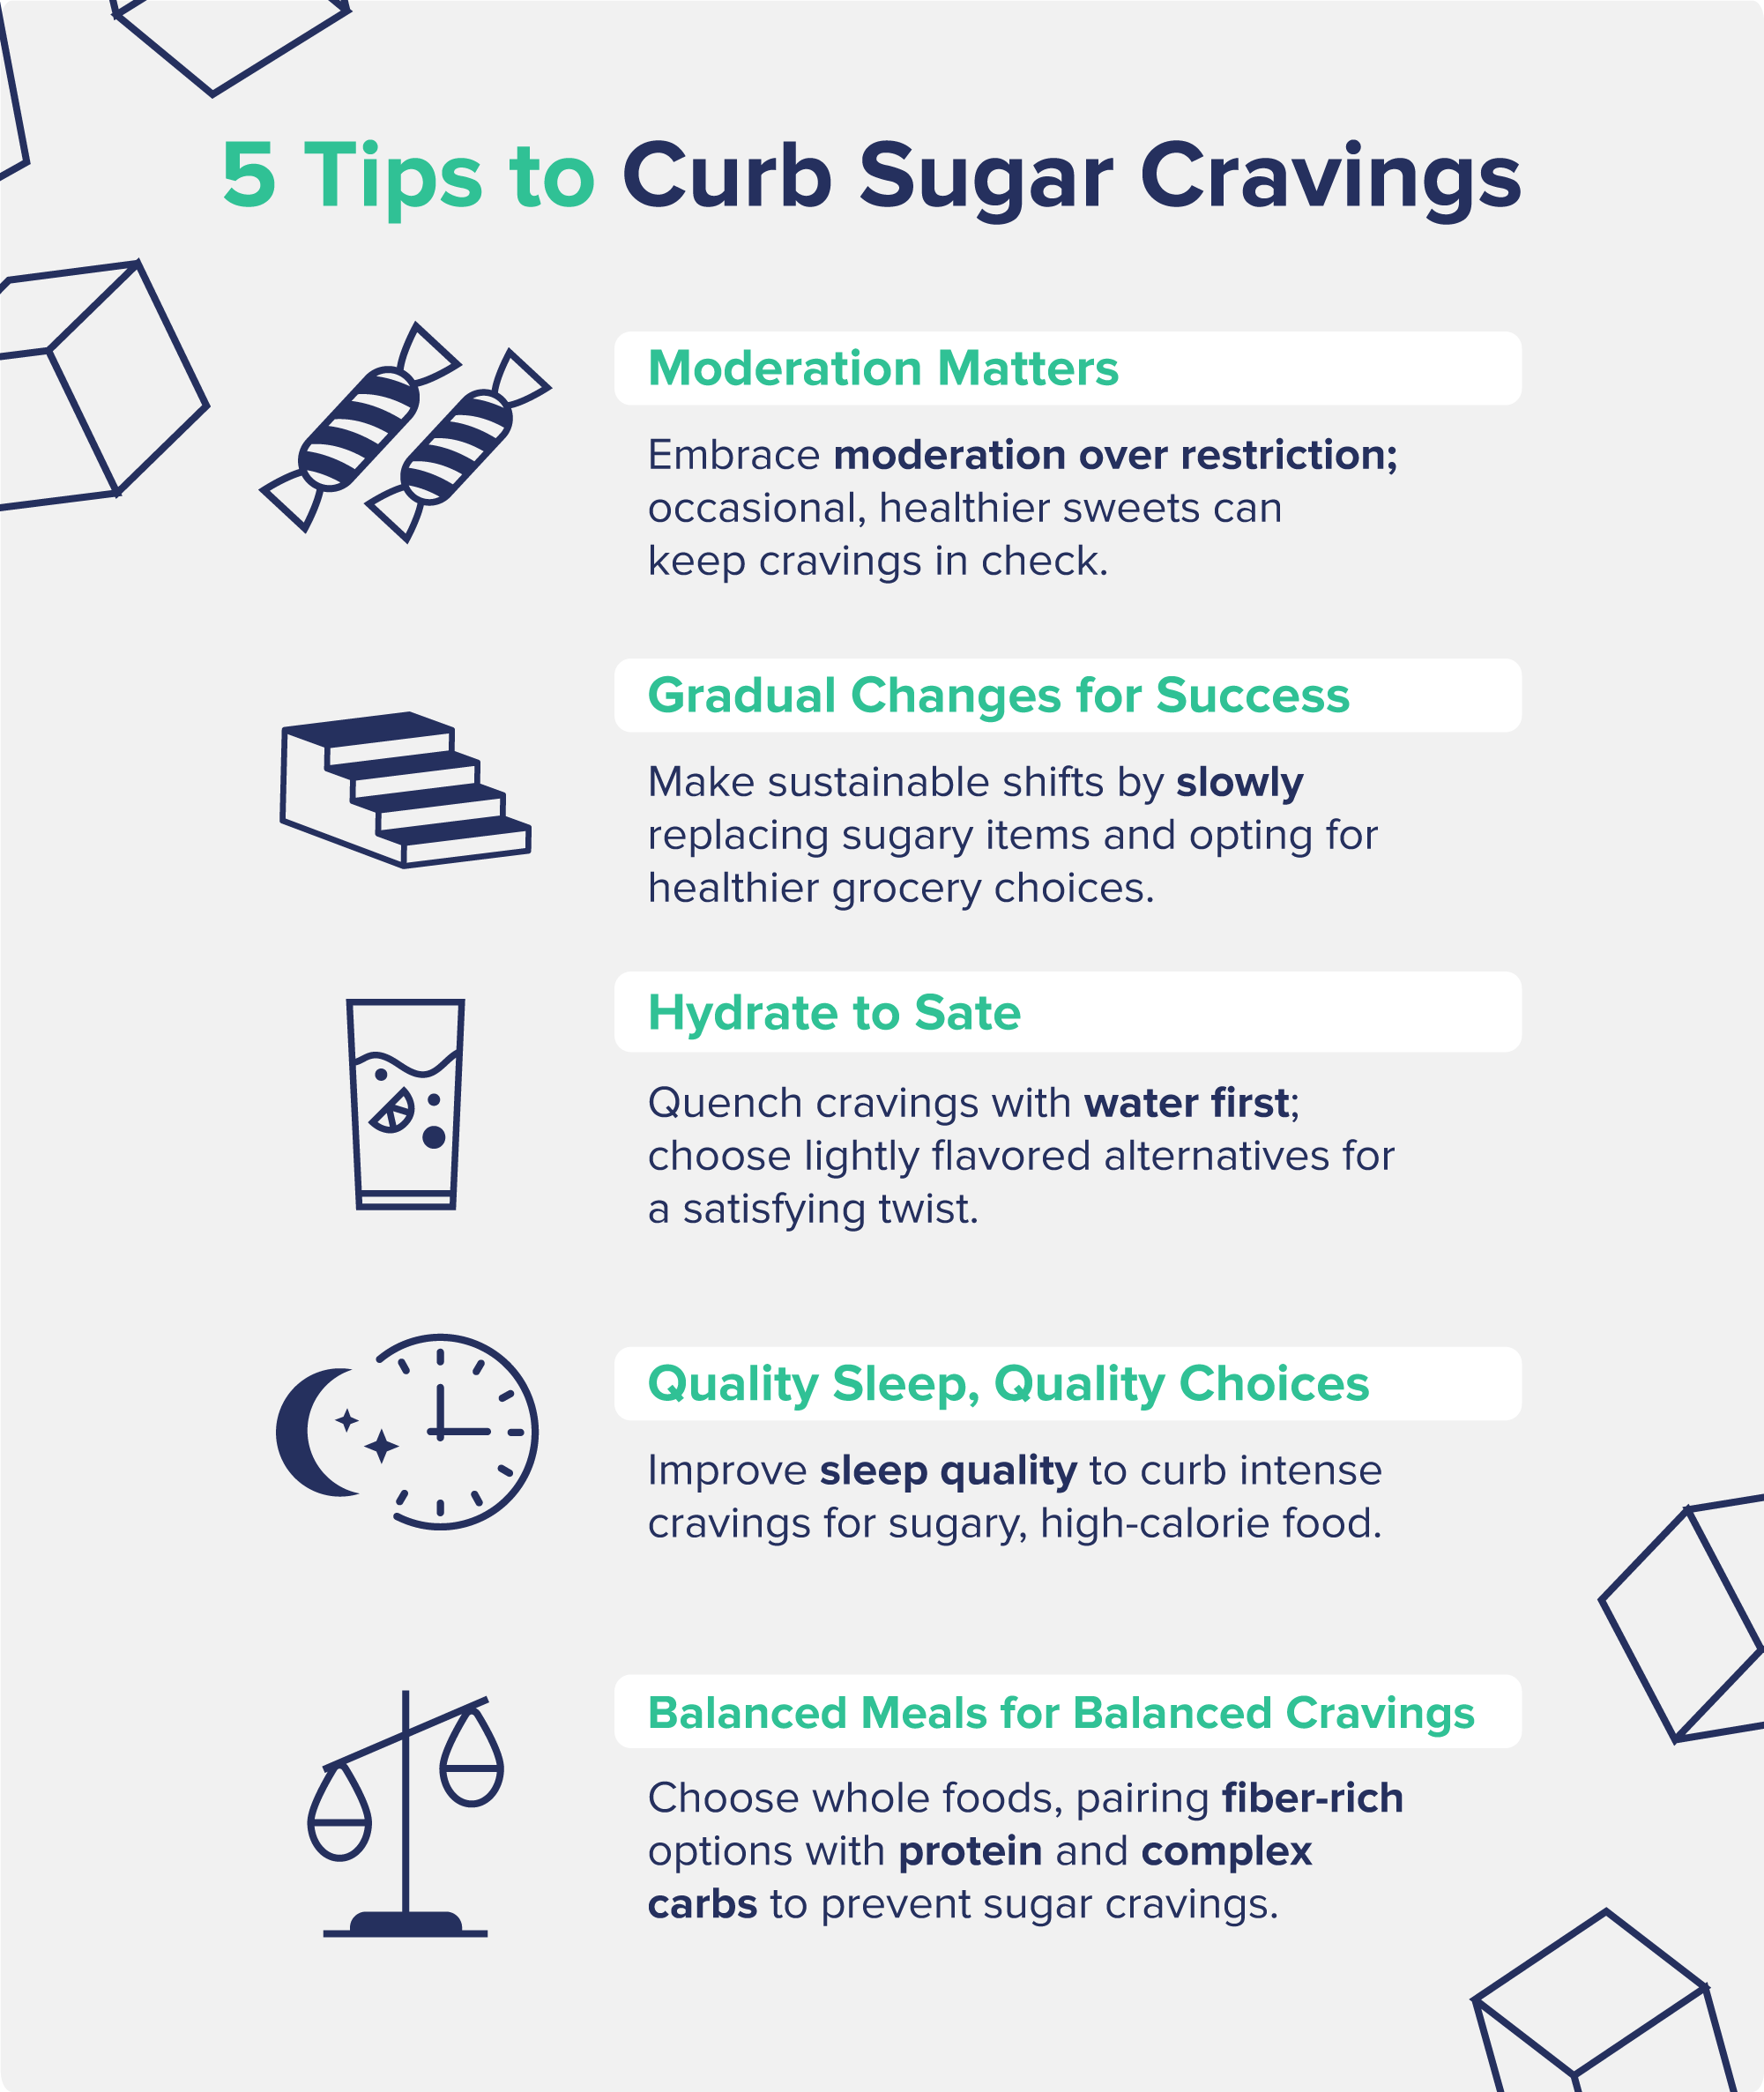 A graphic entitled "5 Tips to Curb Sugar Cravings," featuring tips (accompanied by images) such as "moderation matters," "hydrate to sate," and "quality sleep."